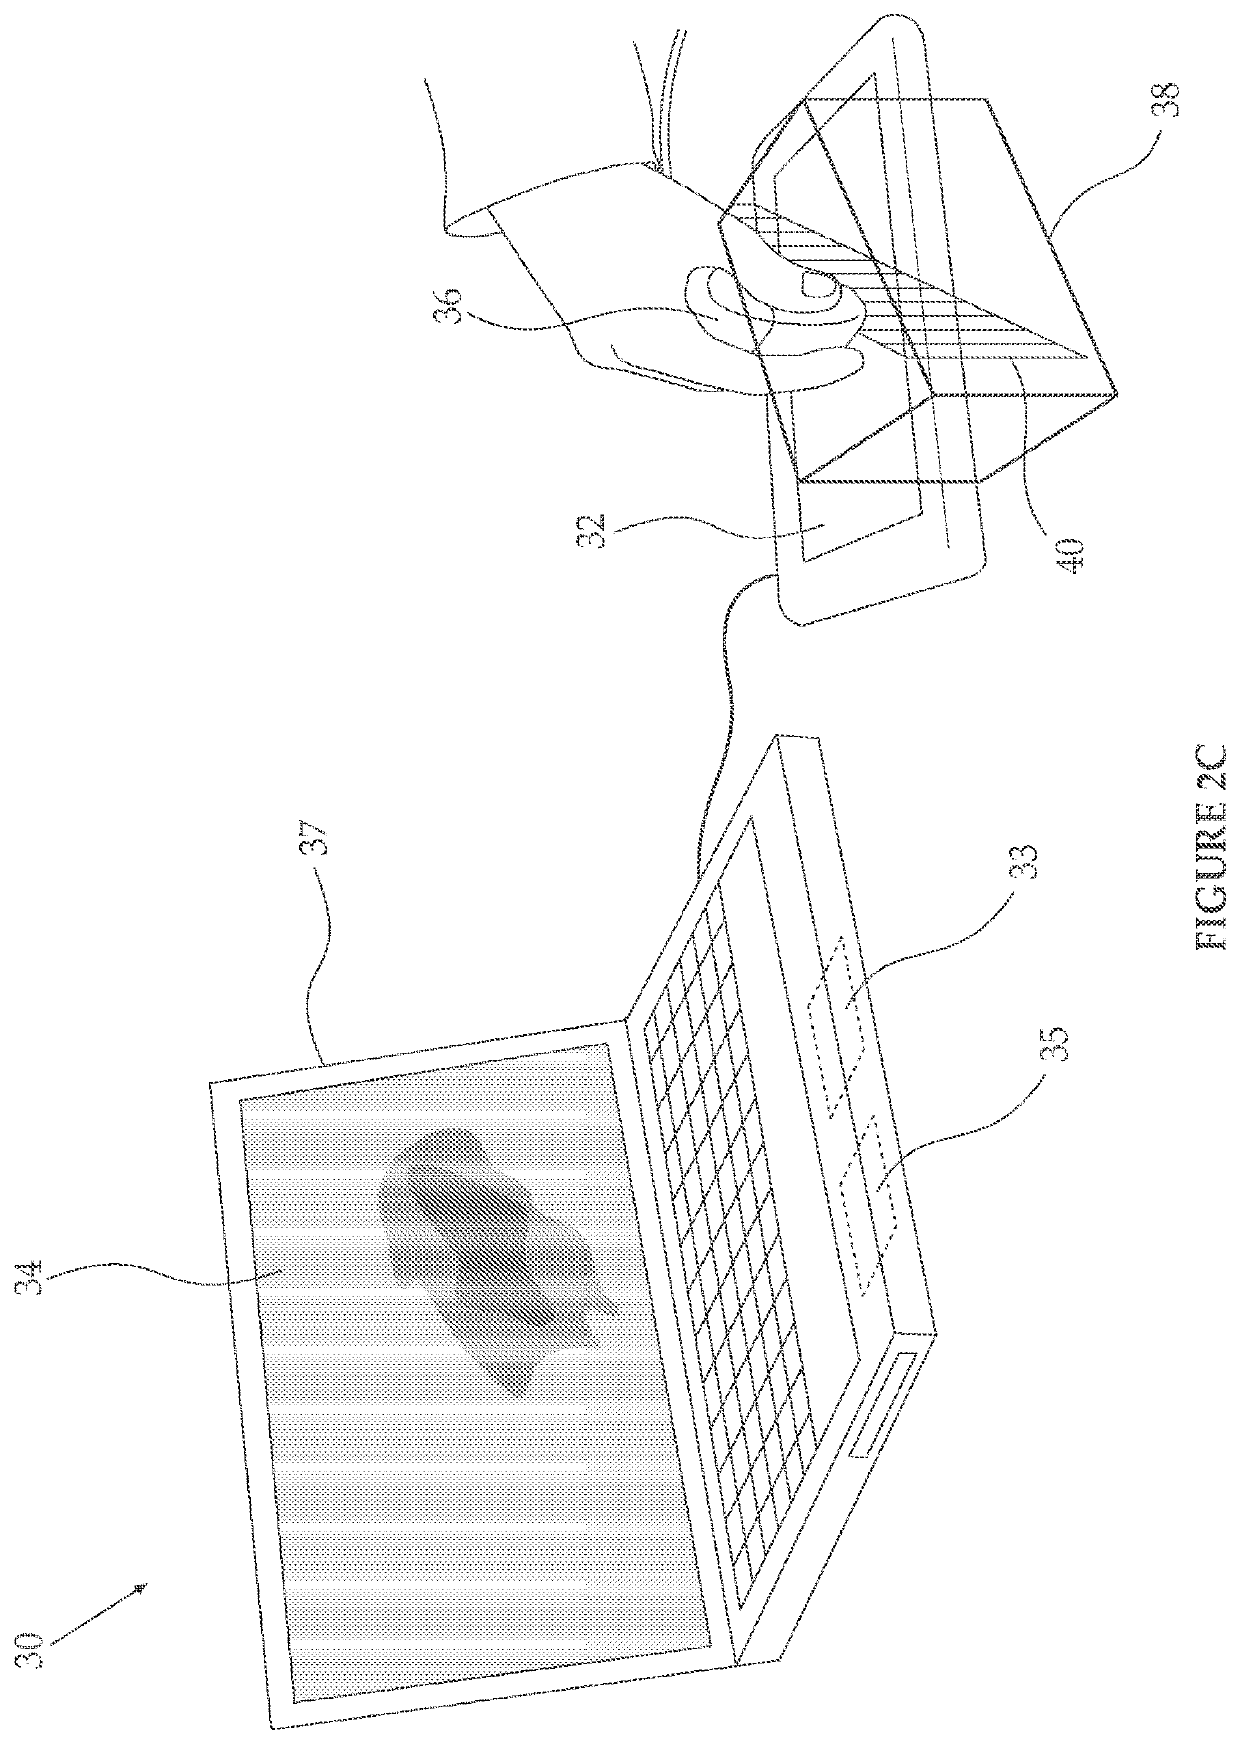 Device for training users of an ultrasound imaging device